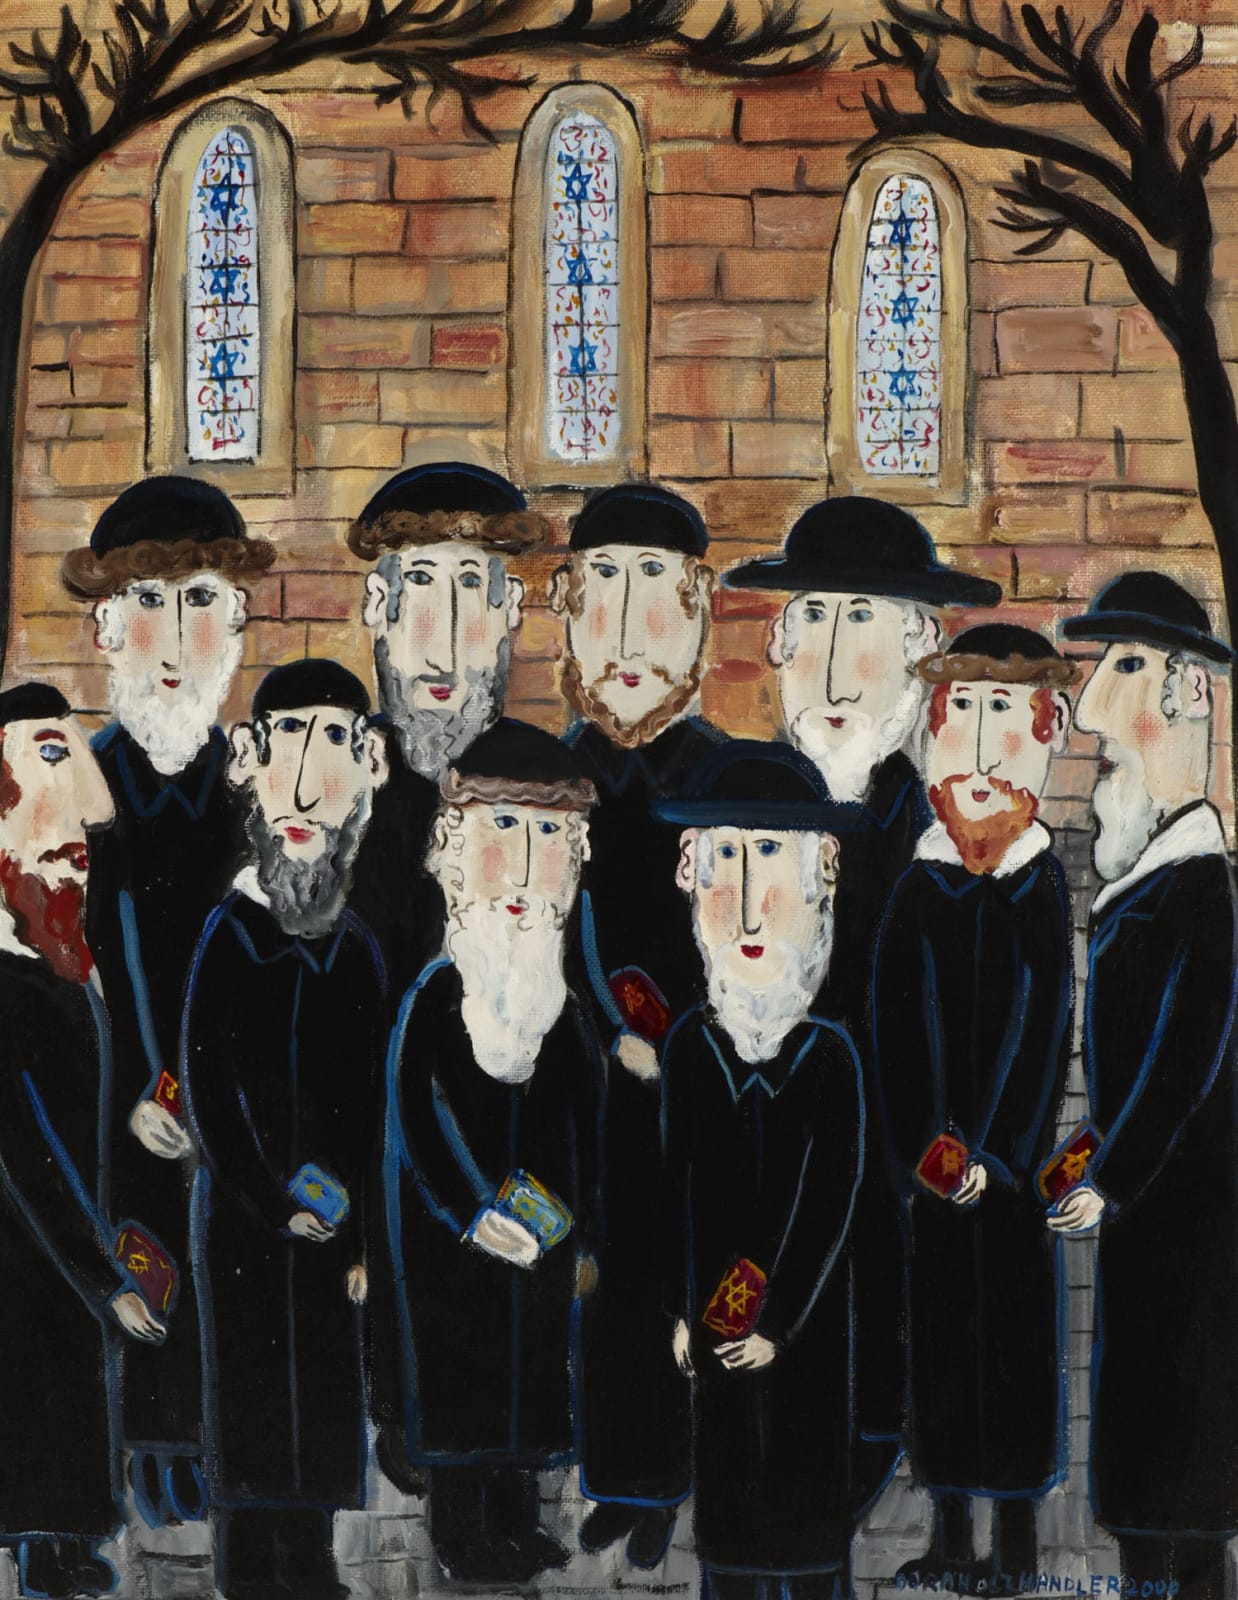 Dora Holzhandler (1928-2015) Group of Jews: The Minyan 2000 Oil on canvas 49 x 39 cm Ben Uri Collection © Dora Holzhandler Presented by Joan Hurst 2009 through the good offices of Art Fund